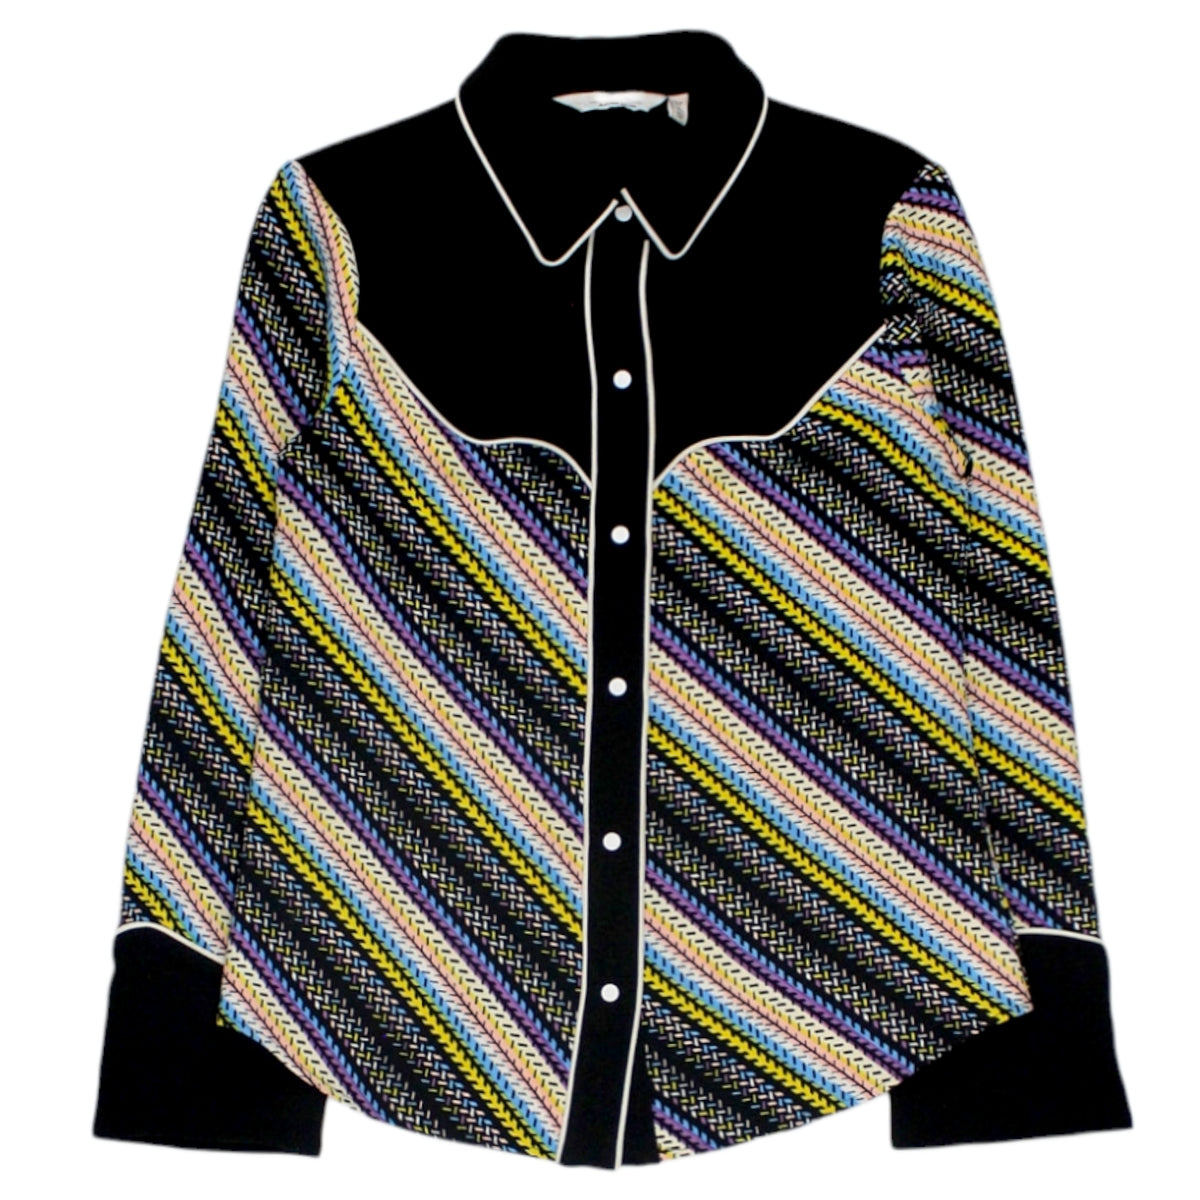 & Other Stories Black/Multi Western Style Shirt